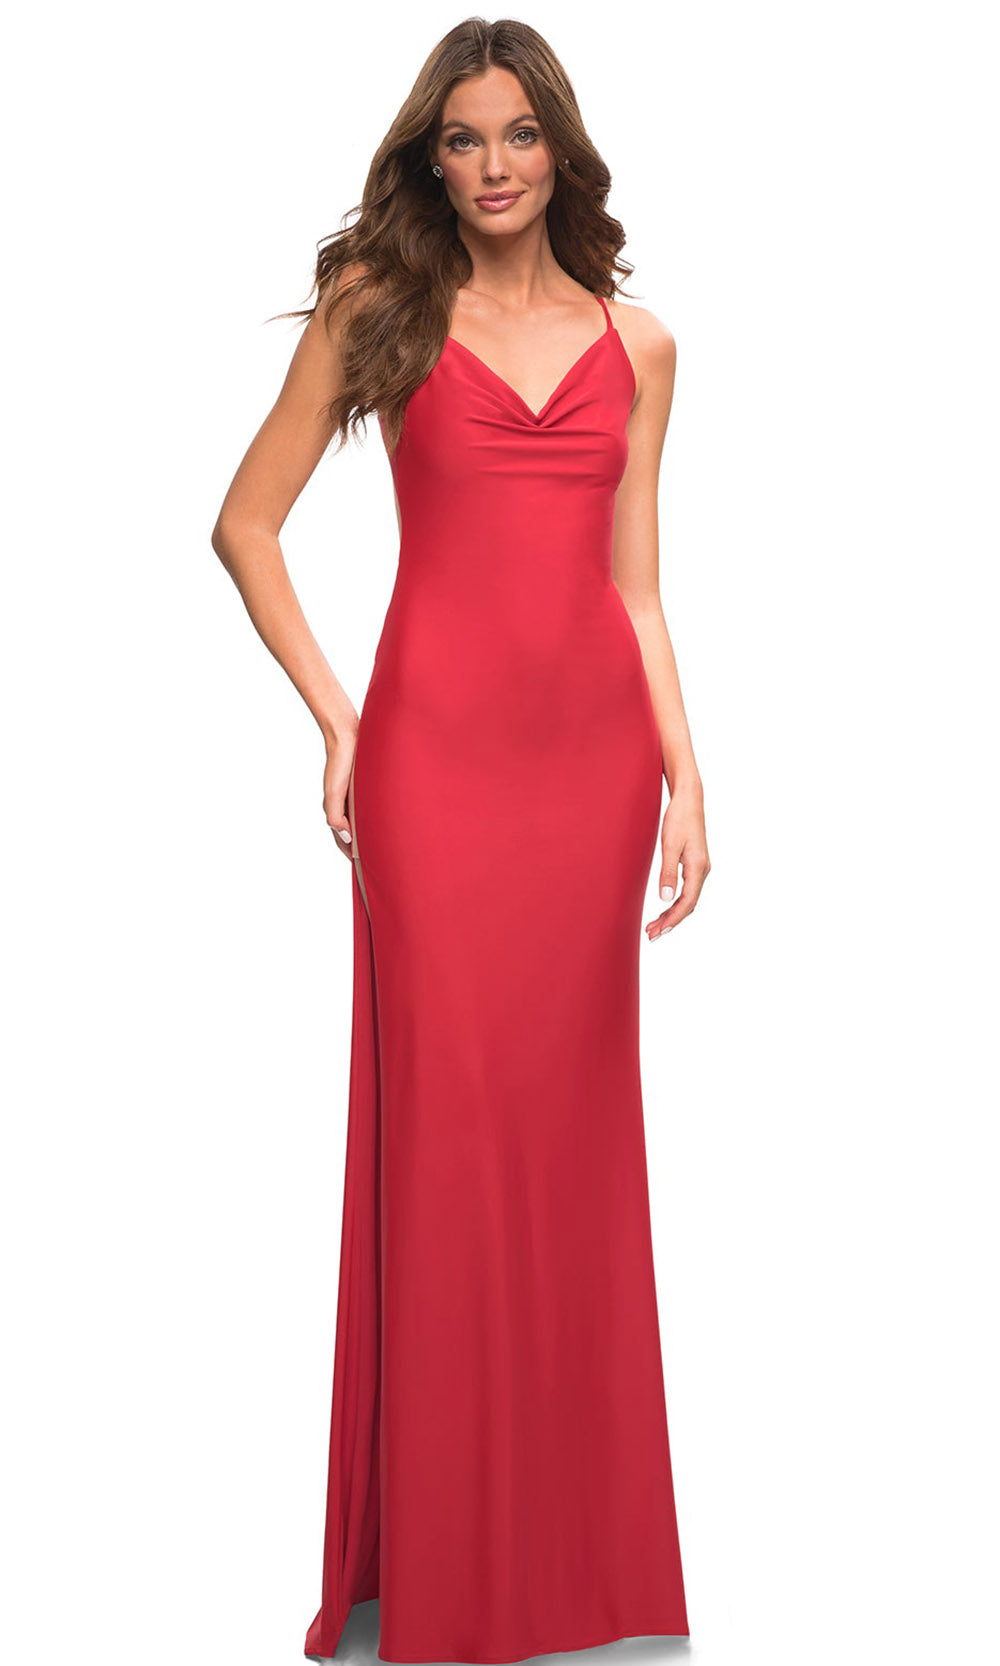 La Femme - 30437 Cowl Style High Slit Gown In Red